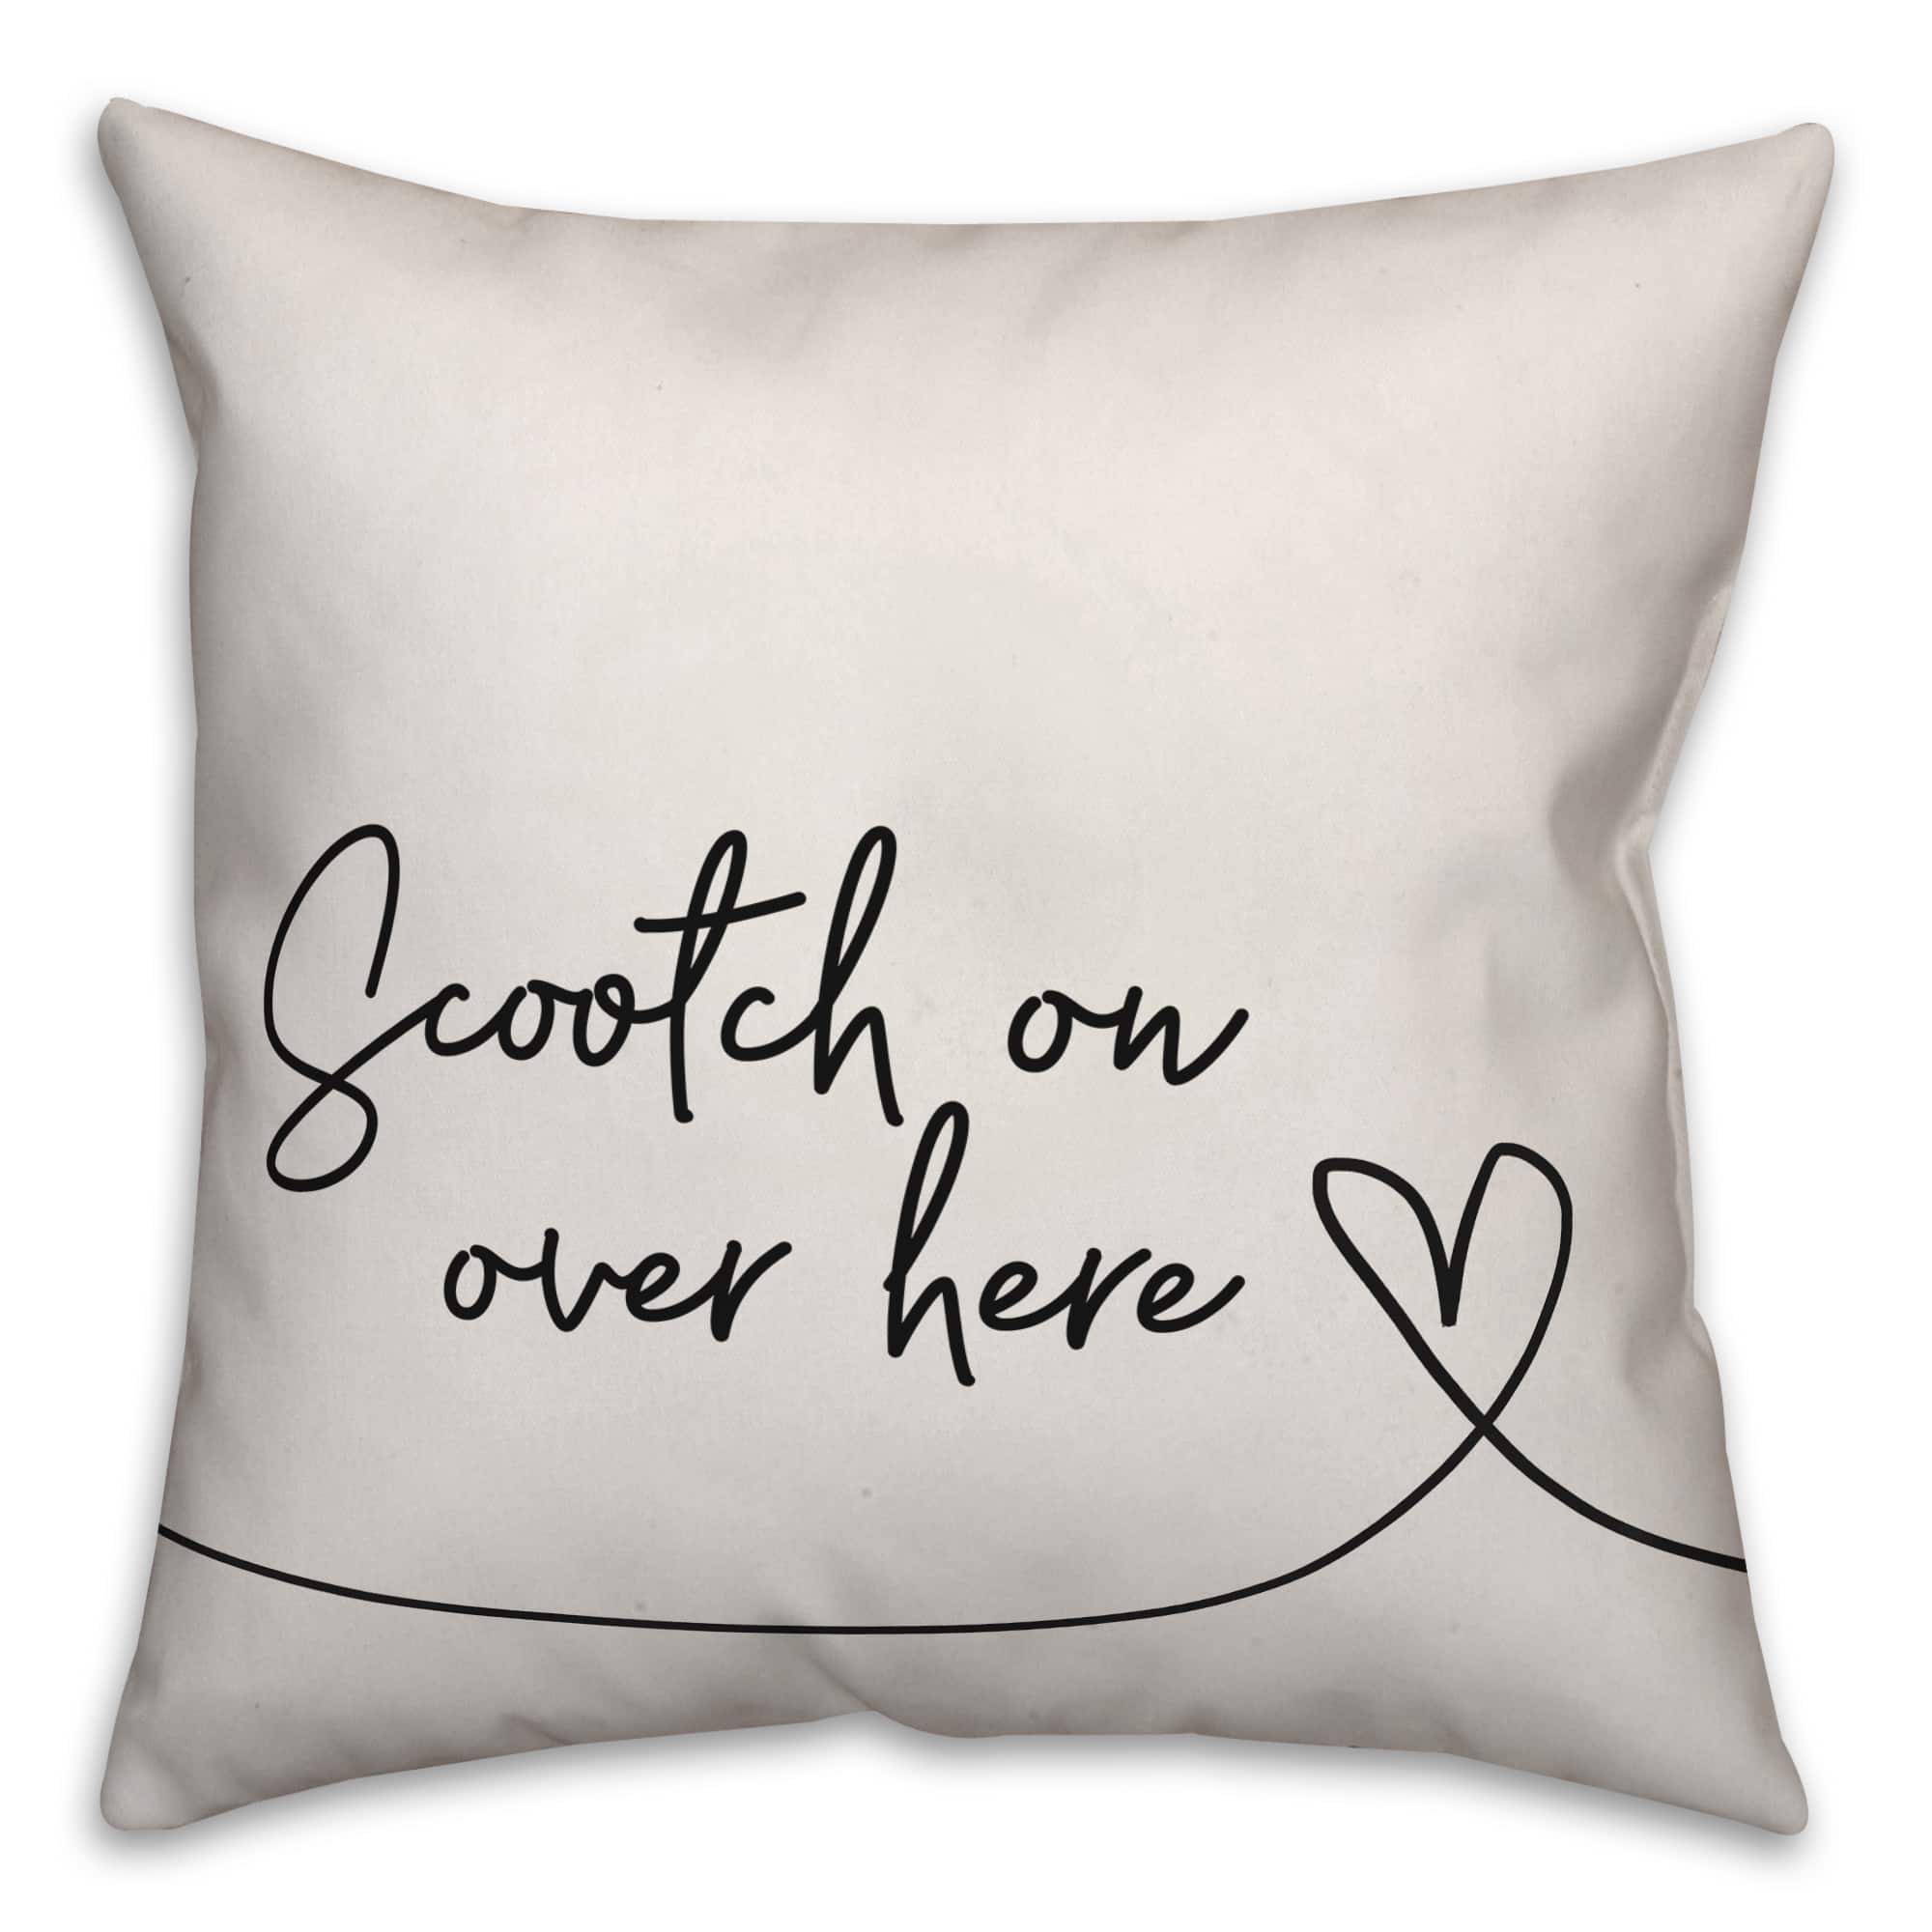 Scootch On Over Here Throw Pillow